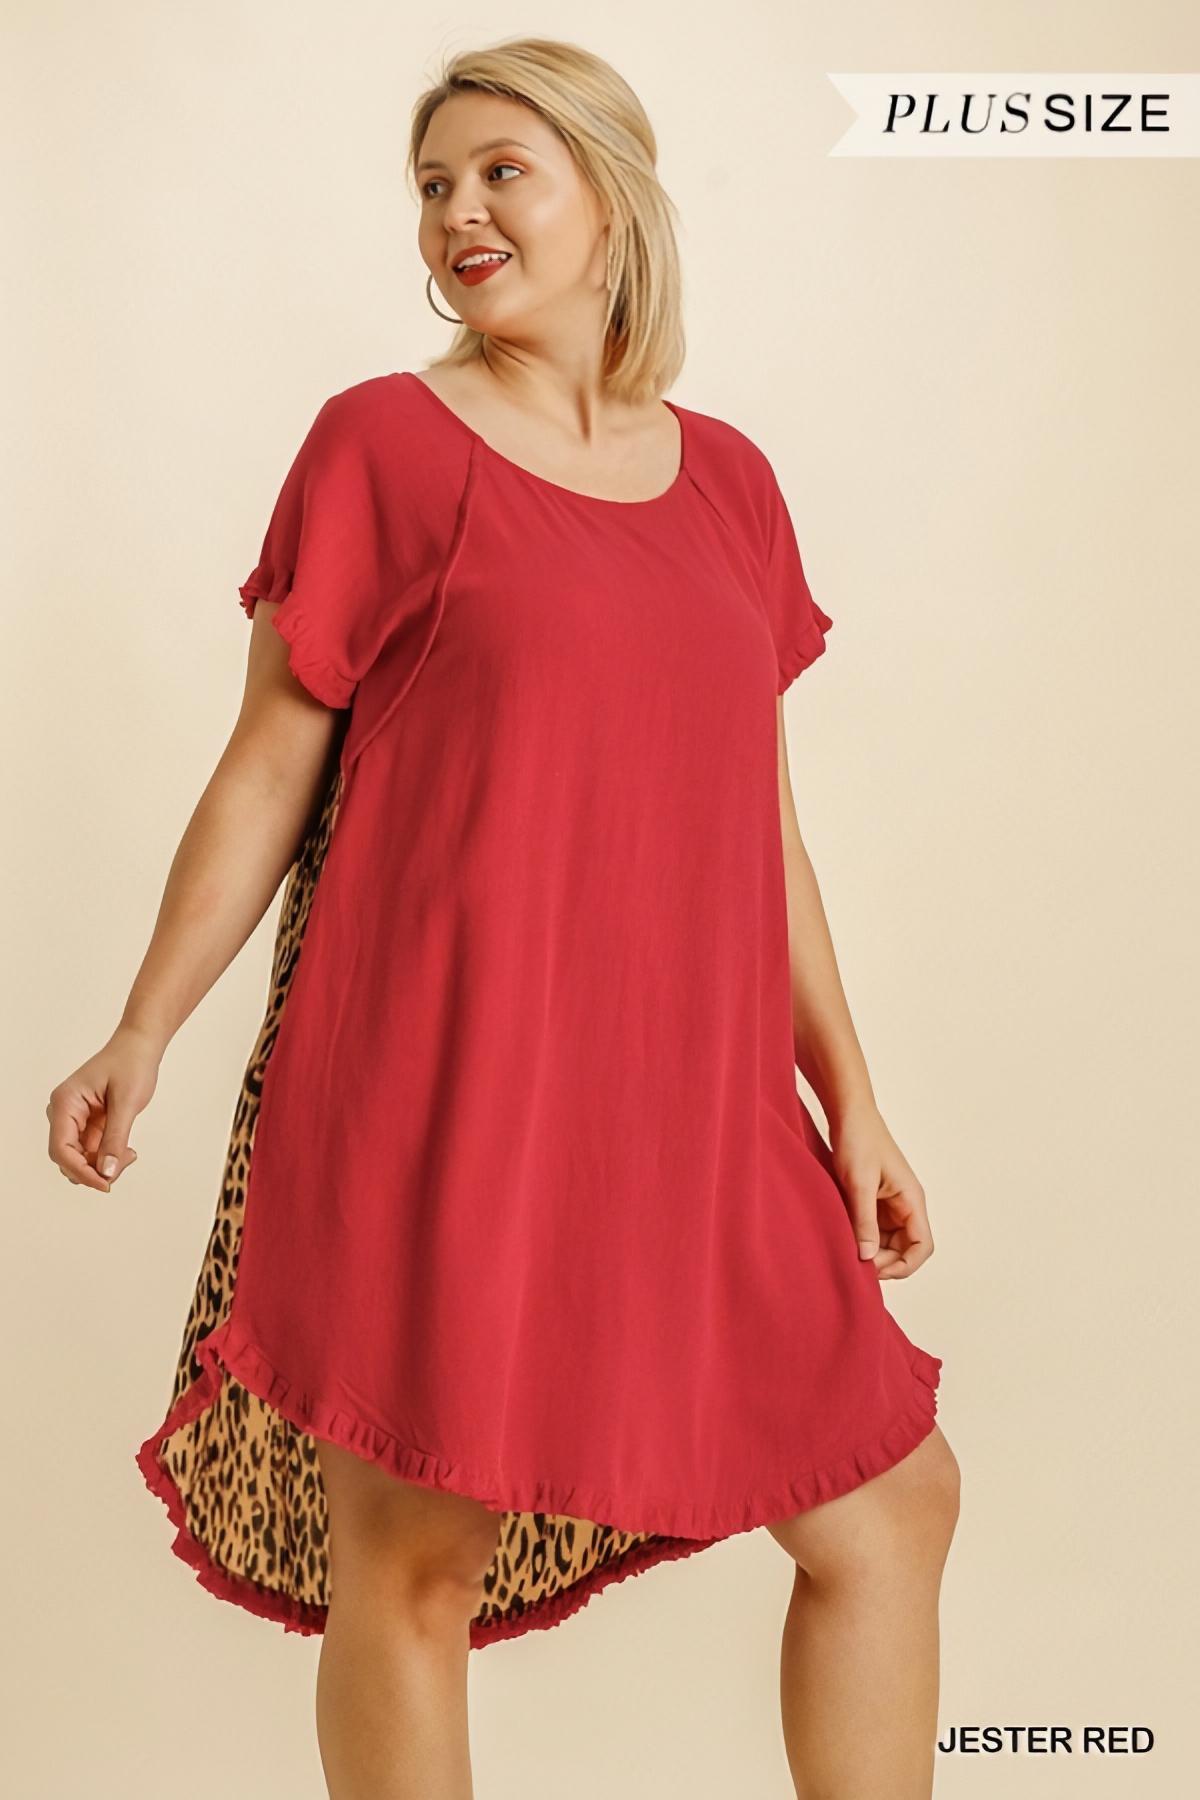 Linen Animal Print Back High-Low Dress in Plus by Umgee Clothing